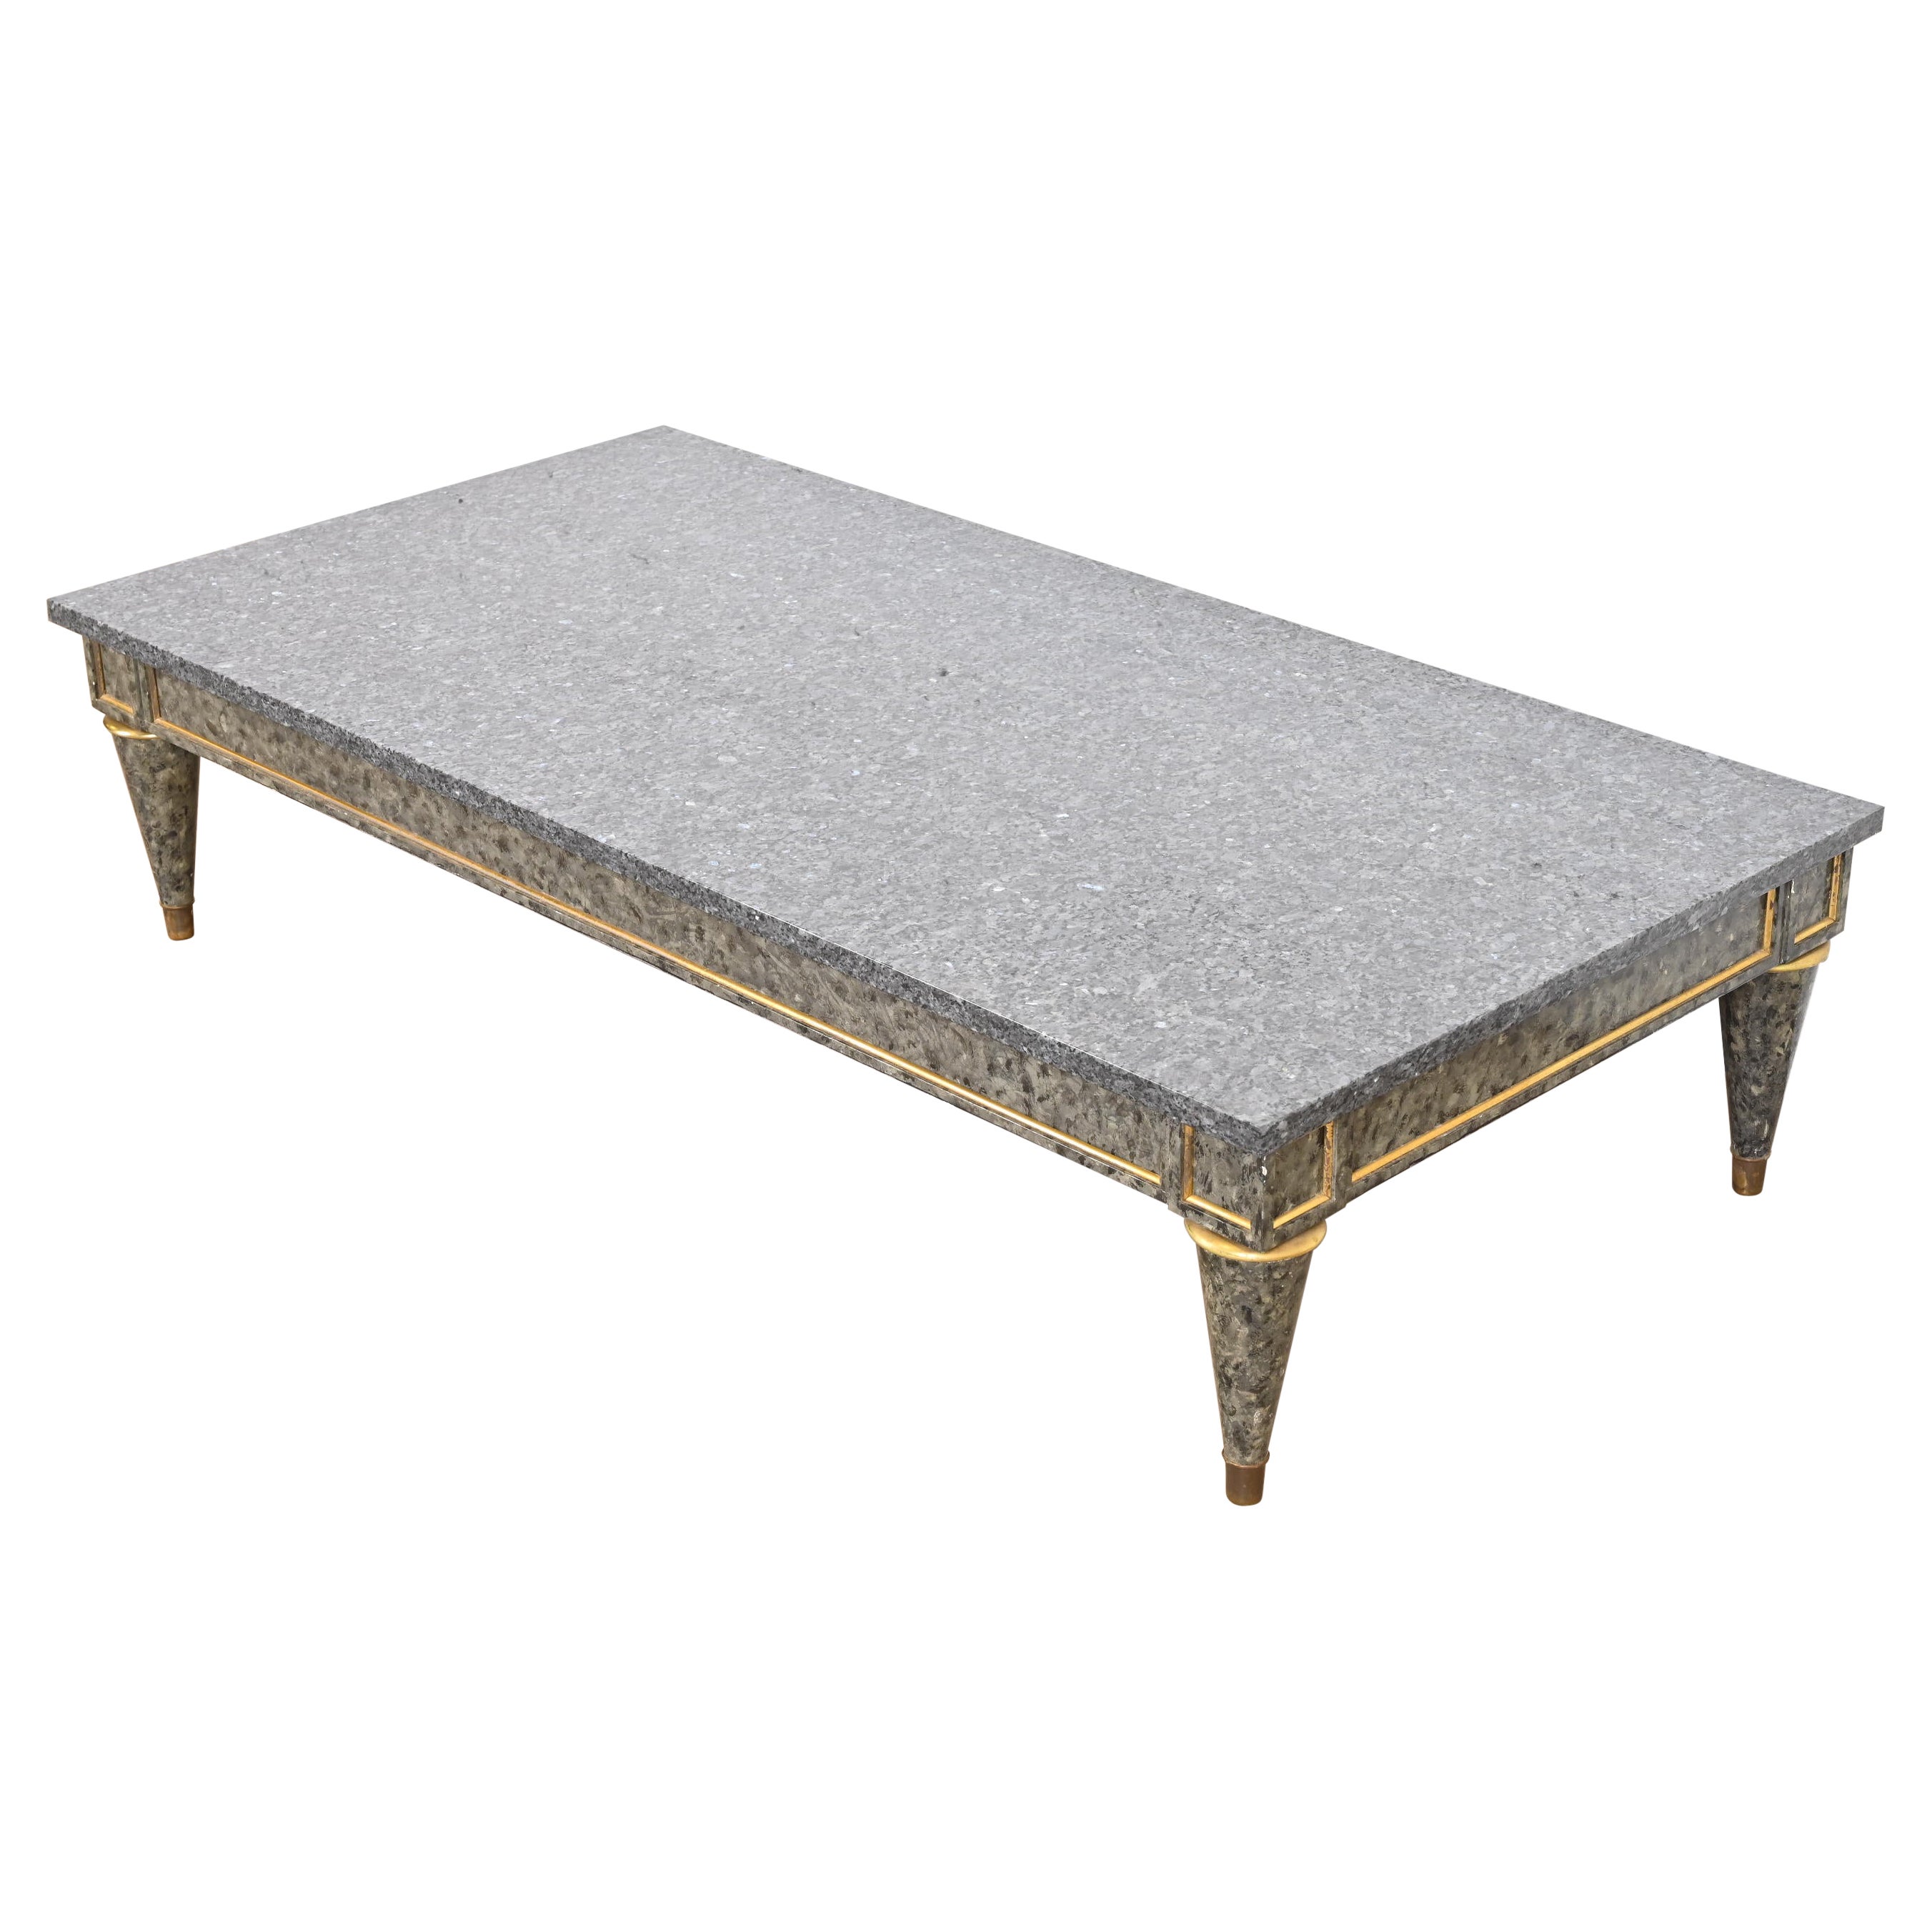 Maison Jansen Attributed French Regency Louis XVI Granite Top Coffee Table For Sale